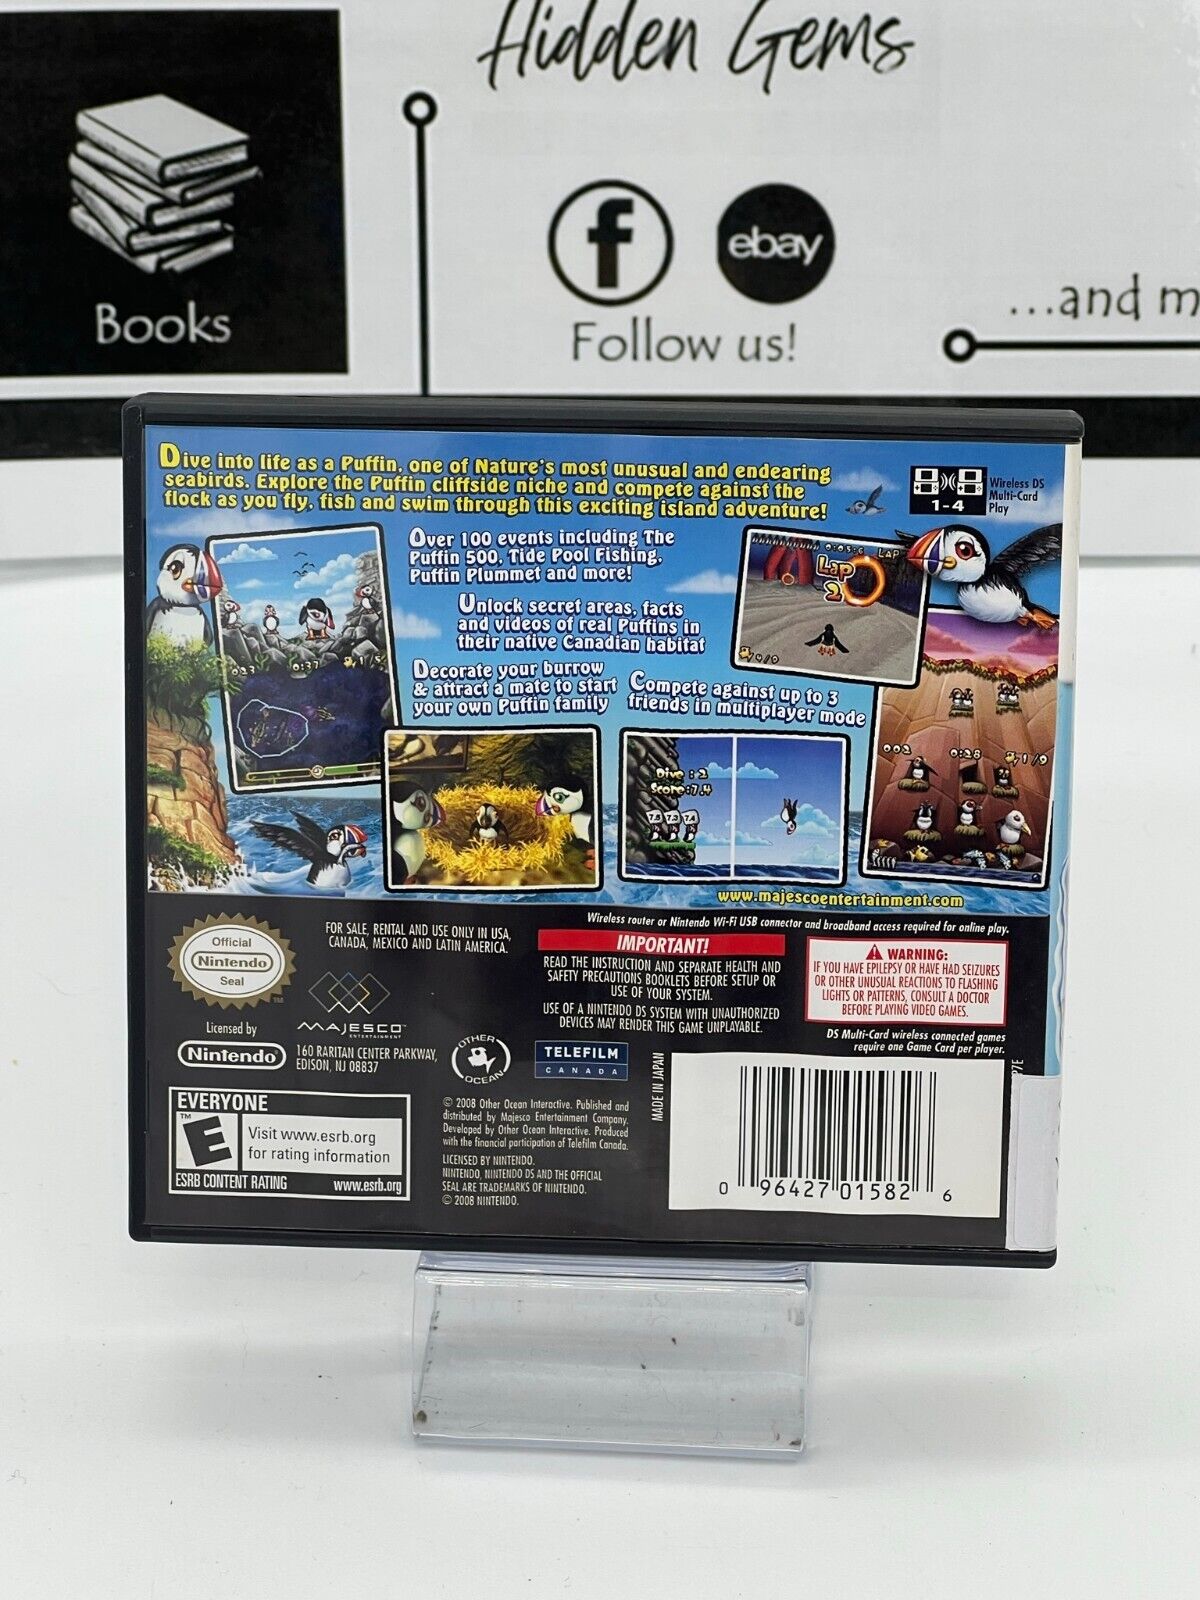 Puffins: Island Adventure (Nintendo DS, 2009) - Tested